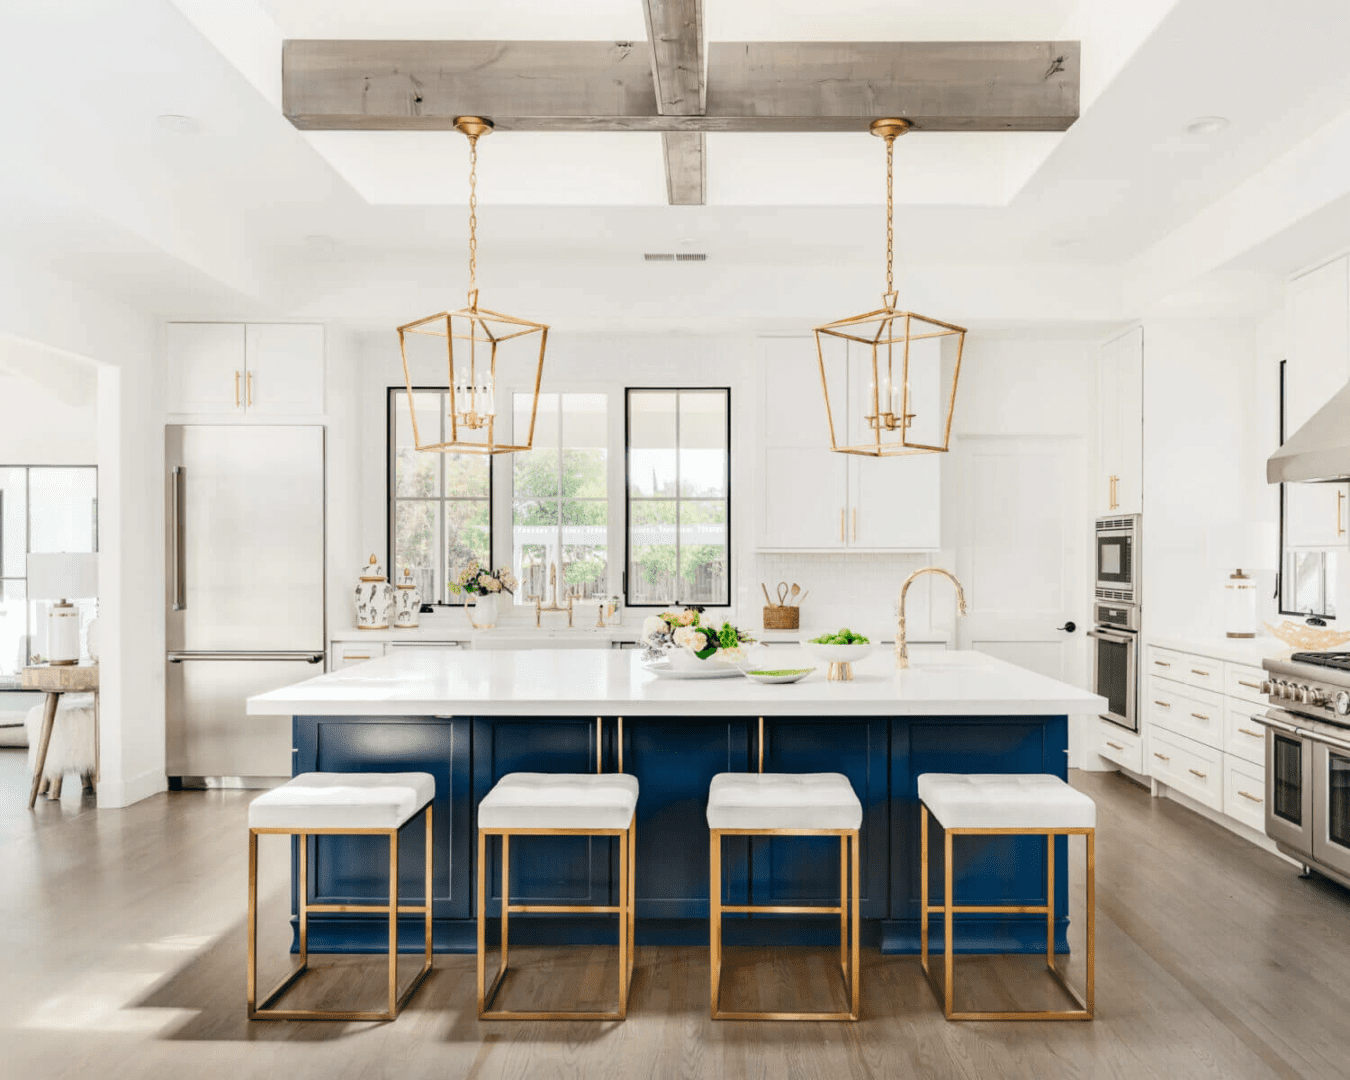 A kitchen with white walls and blue island.